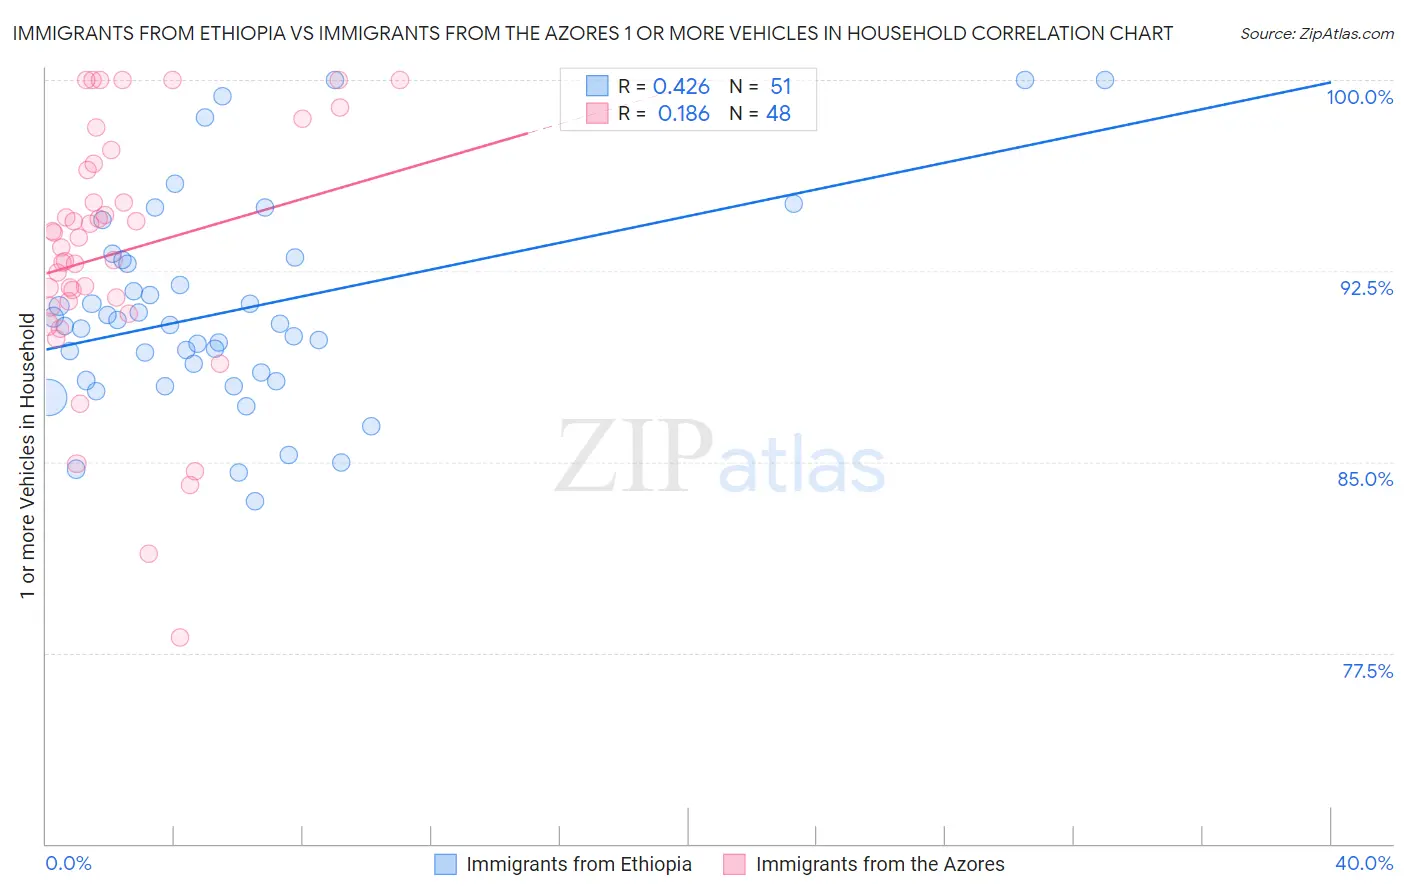 Immigrants from Ethiopia vs Immigrants from the Azores 1 or more Vehicles in Household